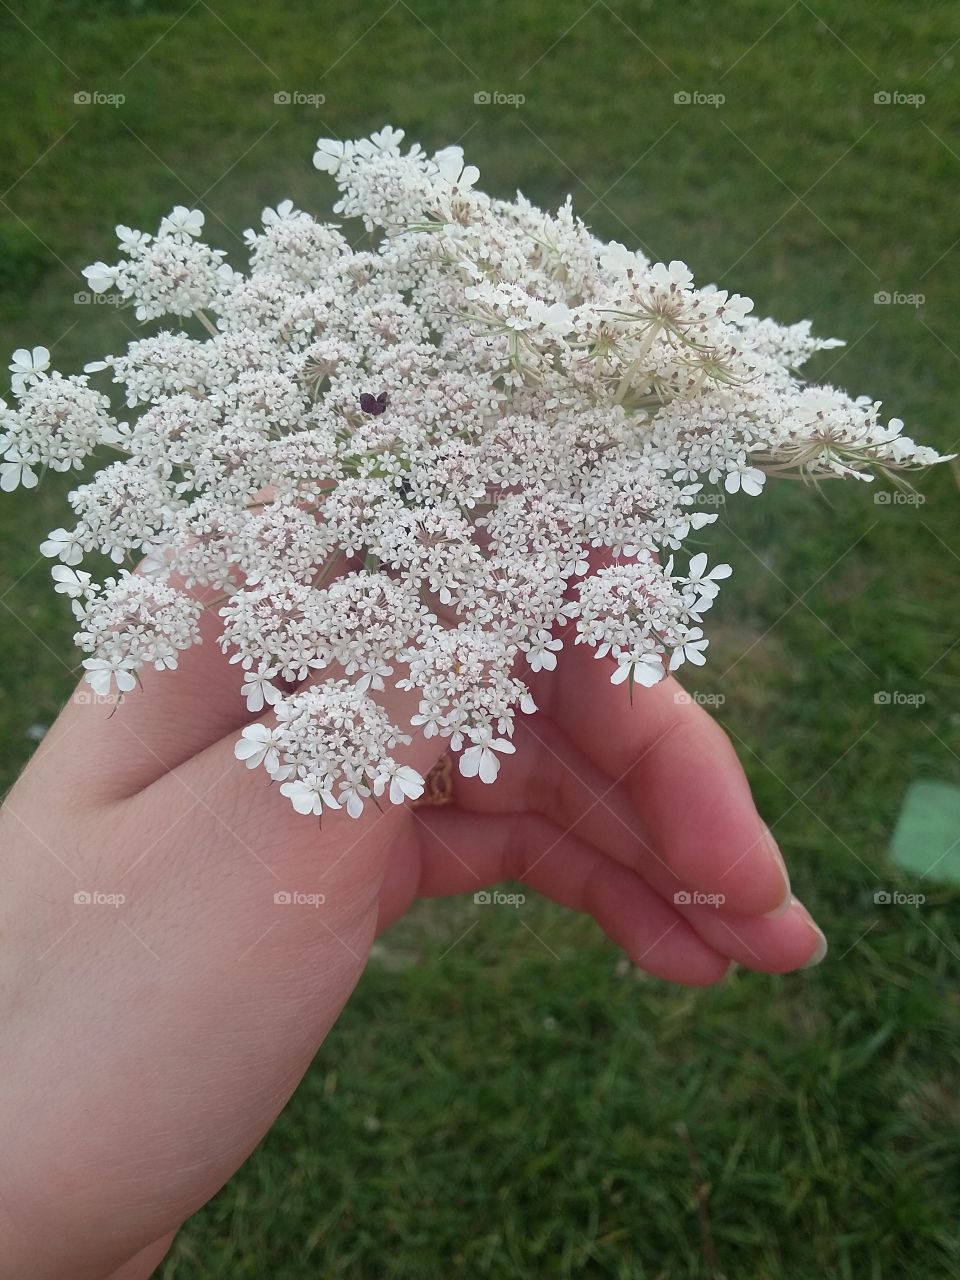 The beauty of the spring flowers in the hand of the village girl